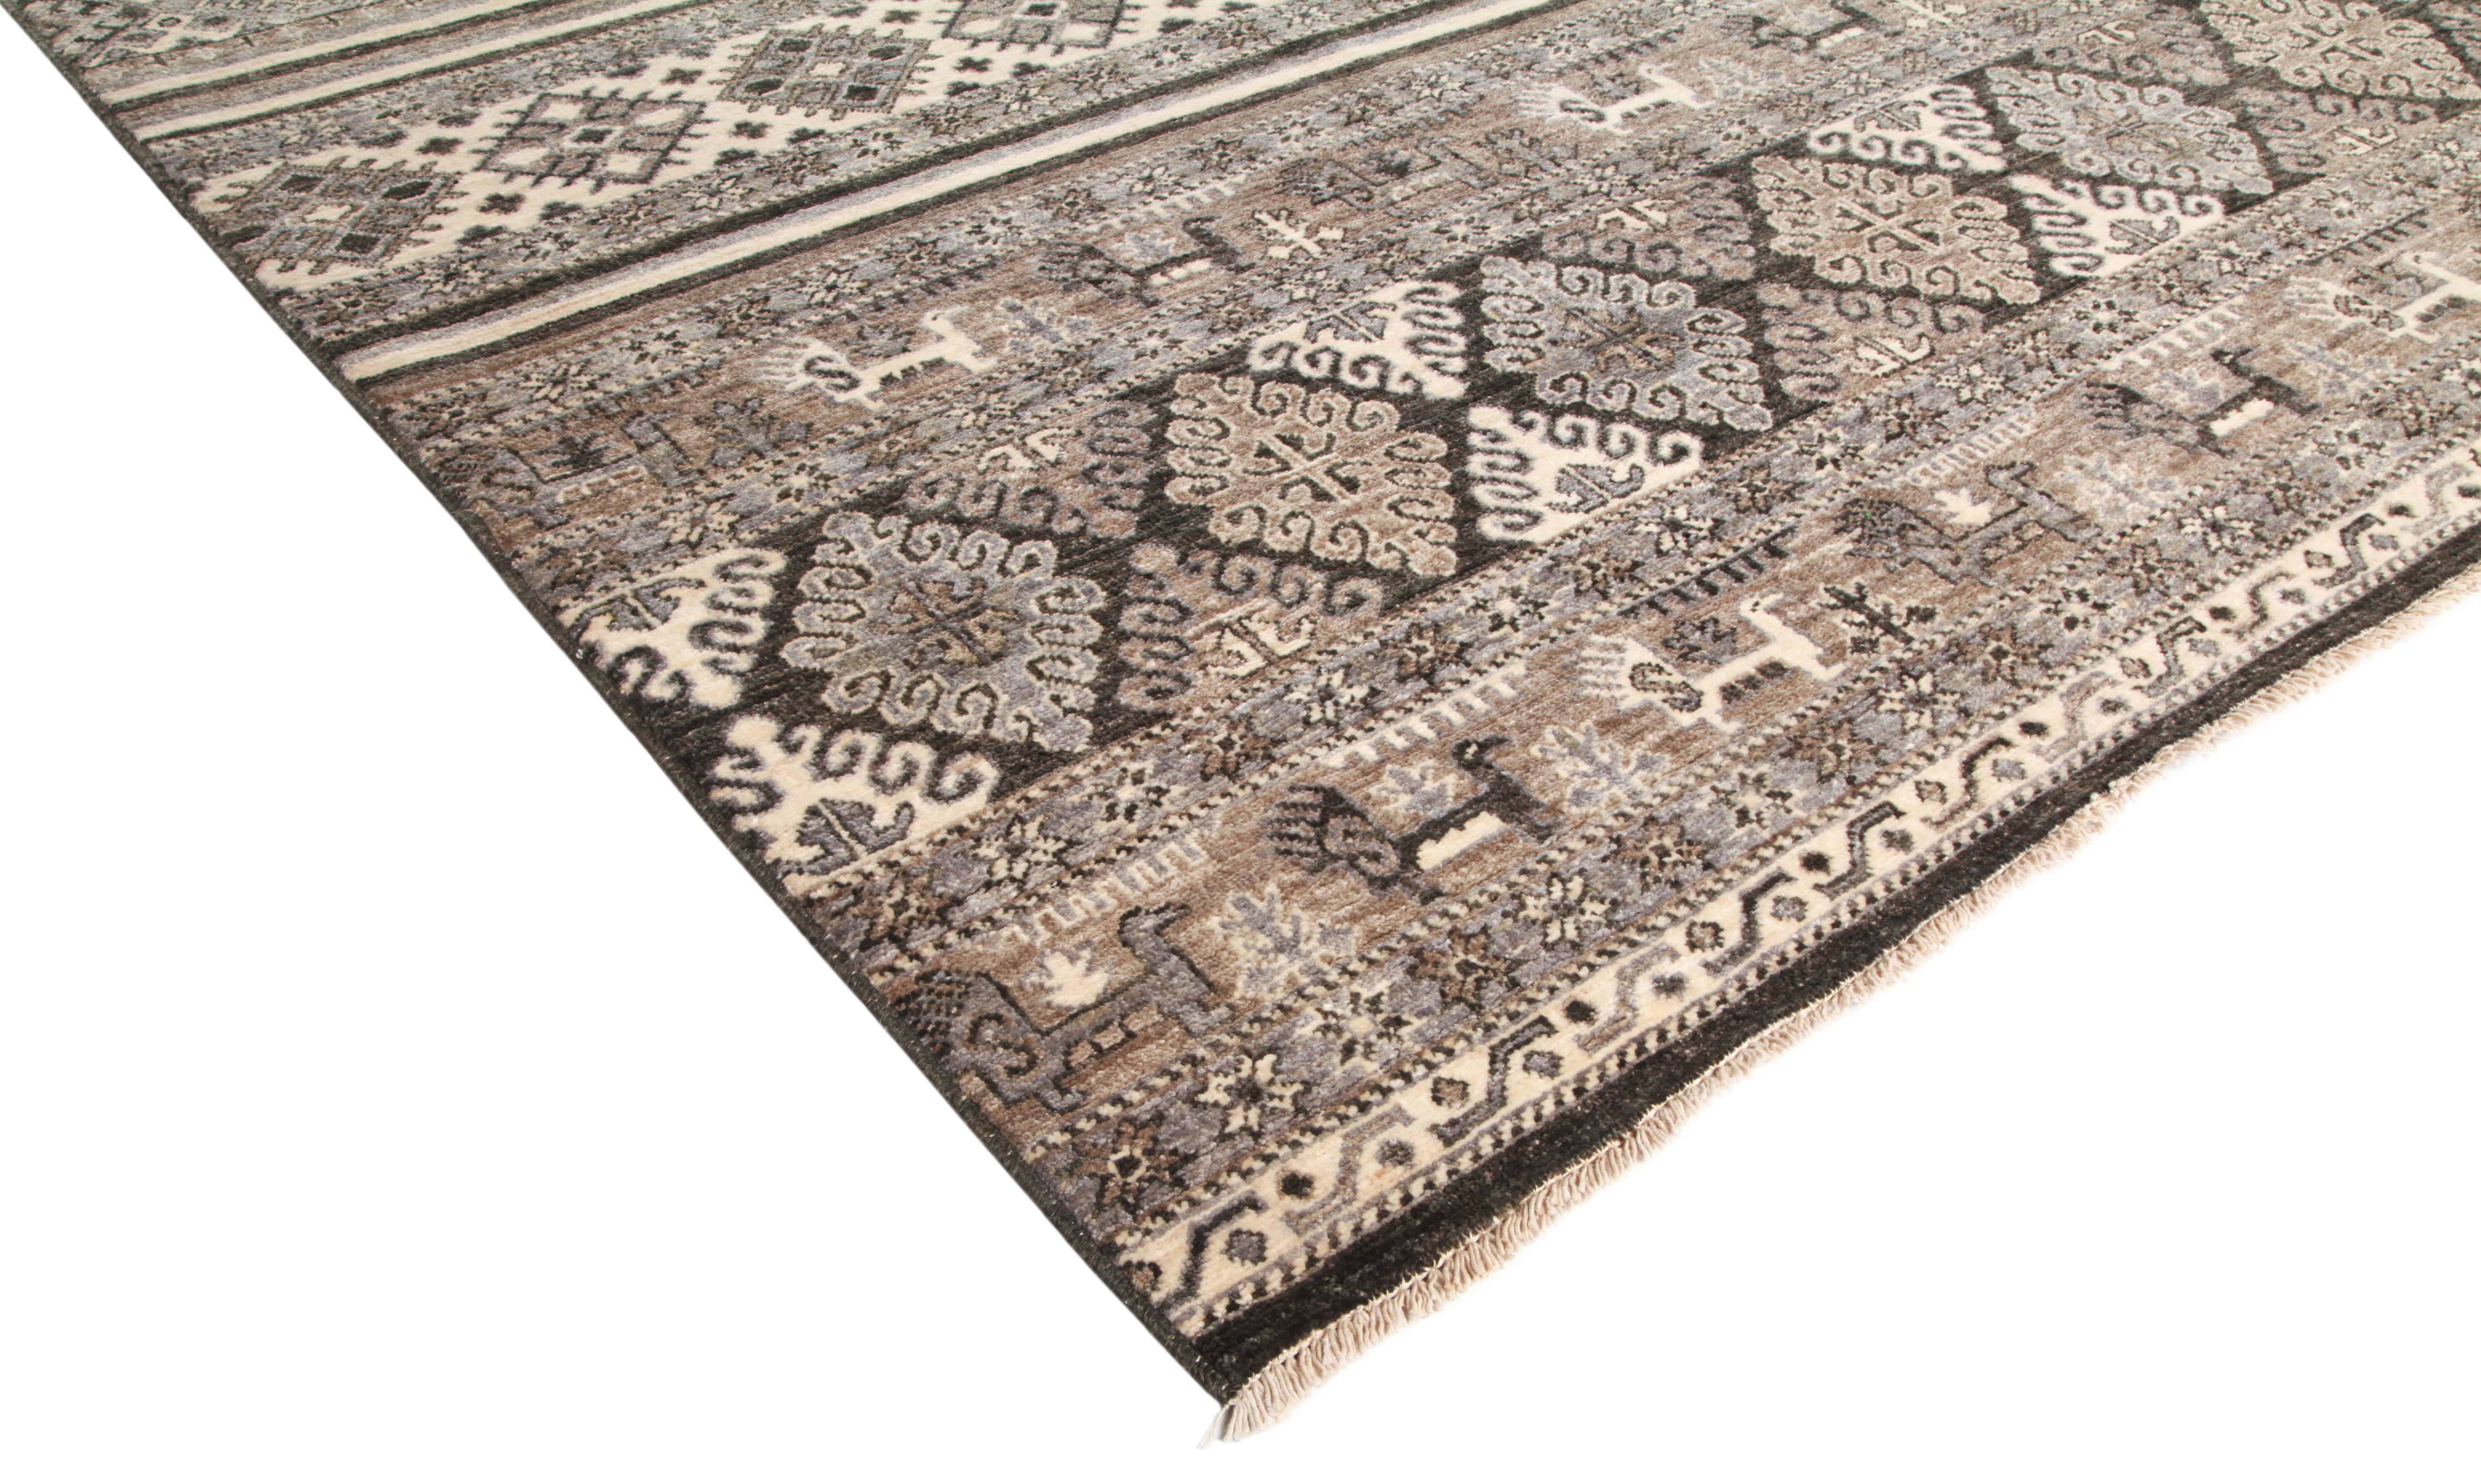 Inspired by elements of traditional textile design from Western Africa, our African Collection offers a variety striking geometric patterns. Common motifs include diamonds, linear medallions, and stepped-fret shapes, giving these rugs a bold and